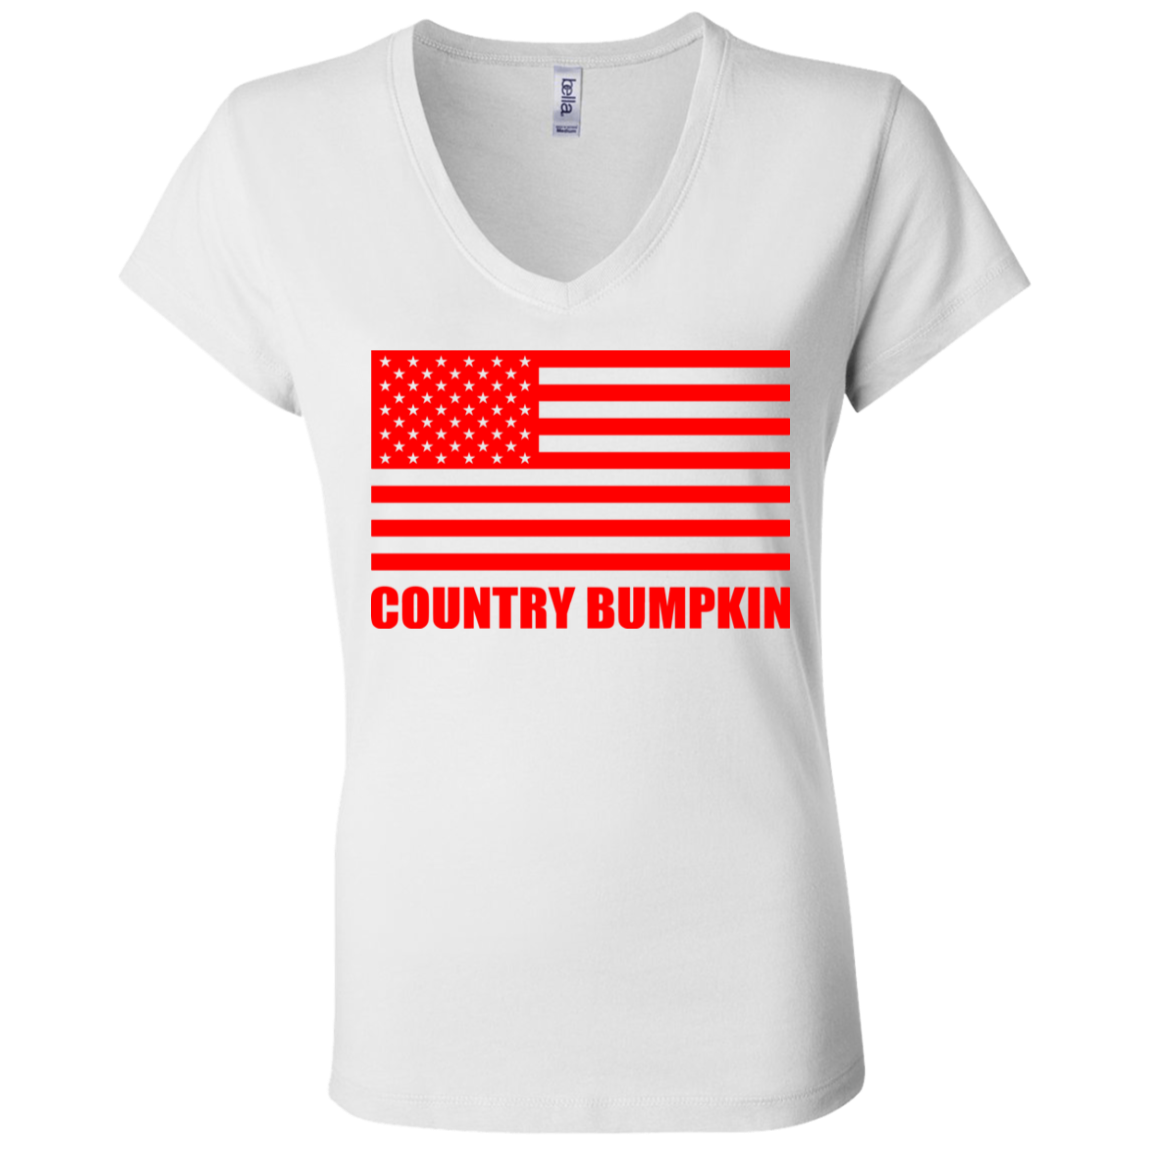 "Country Bumpkin" Red American Flag B6005 Ladies' Jersey V-Neck T-Shirt